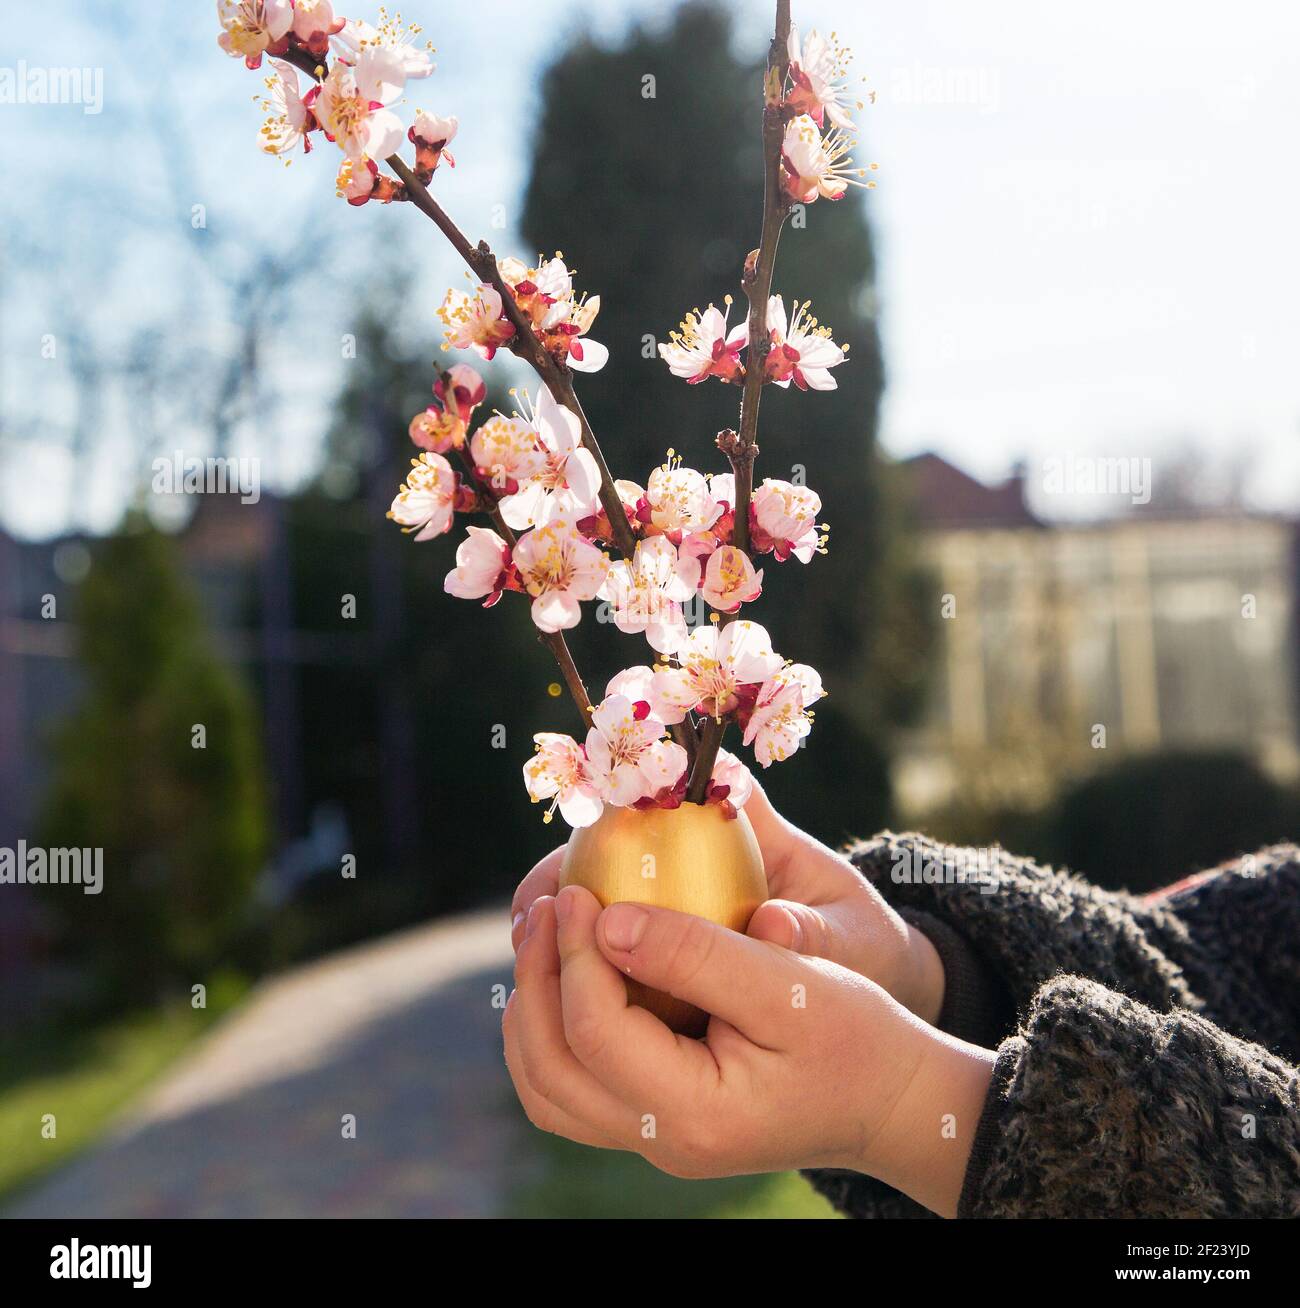 Children's hands hold blooming pink twigs, in an egg golden shell, illuminated by sunlight. Tenderness, calm, gratitude, harmony of nature. Blooming s Stock Photo